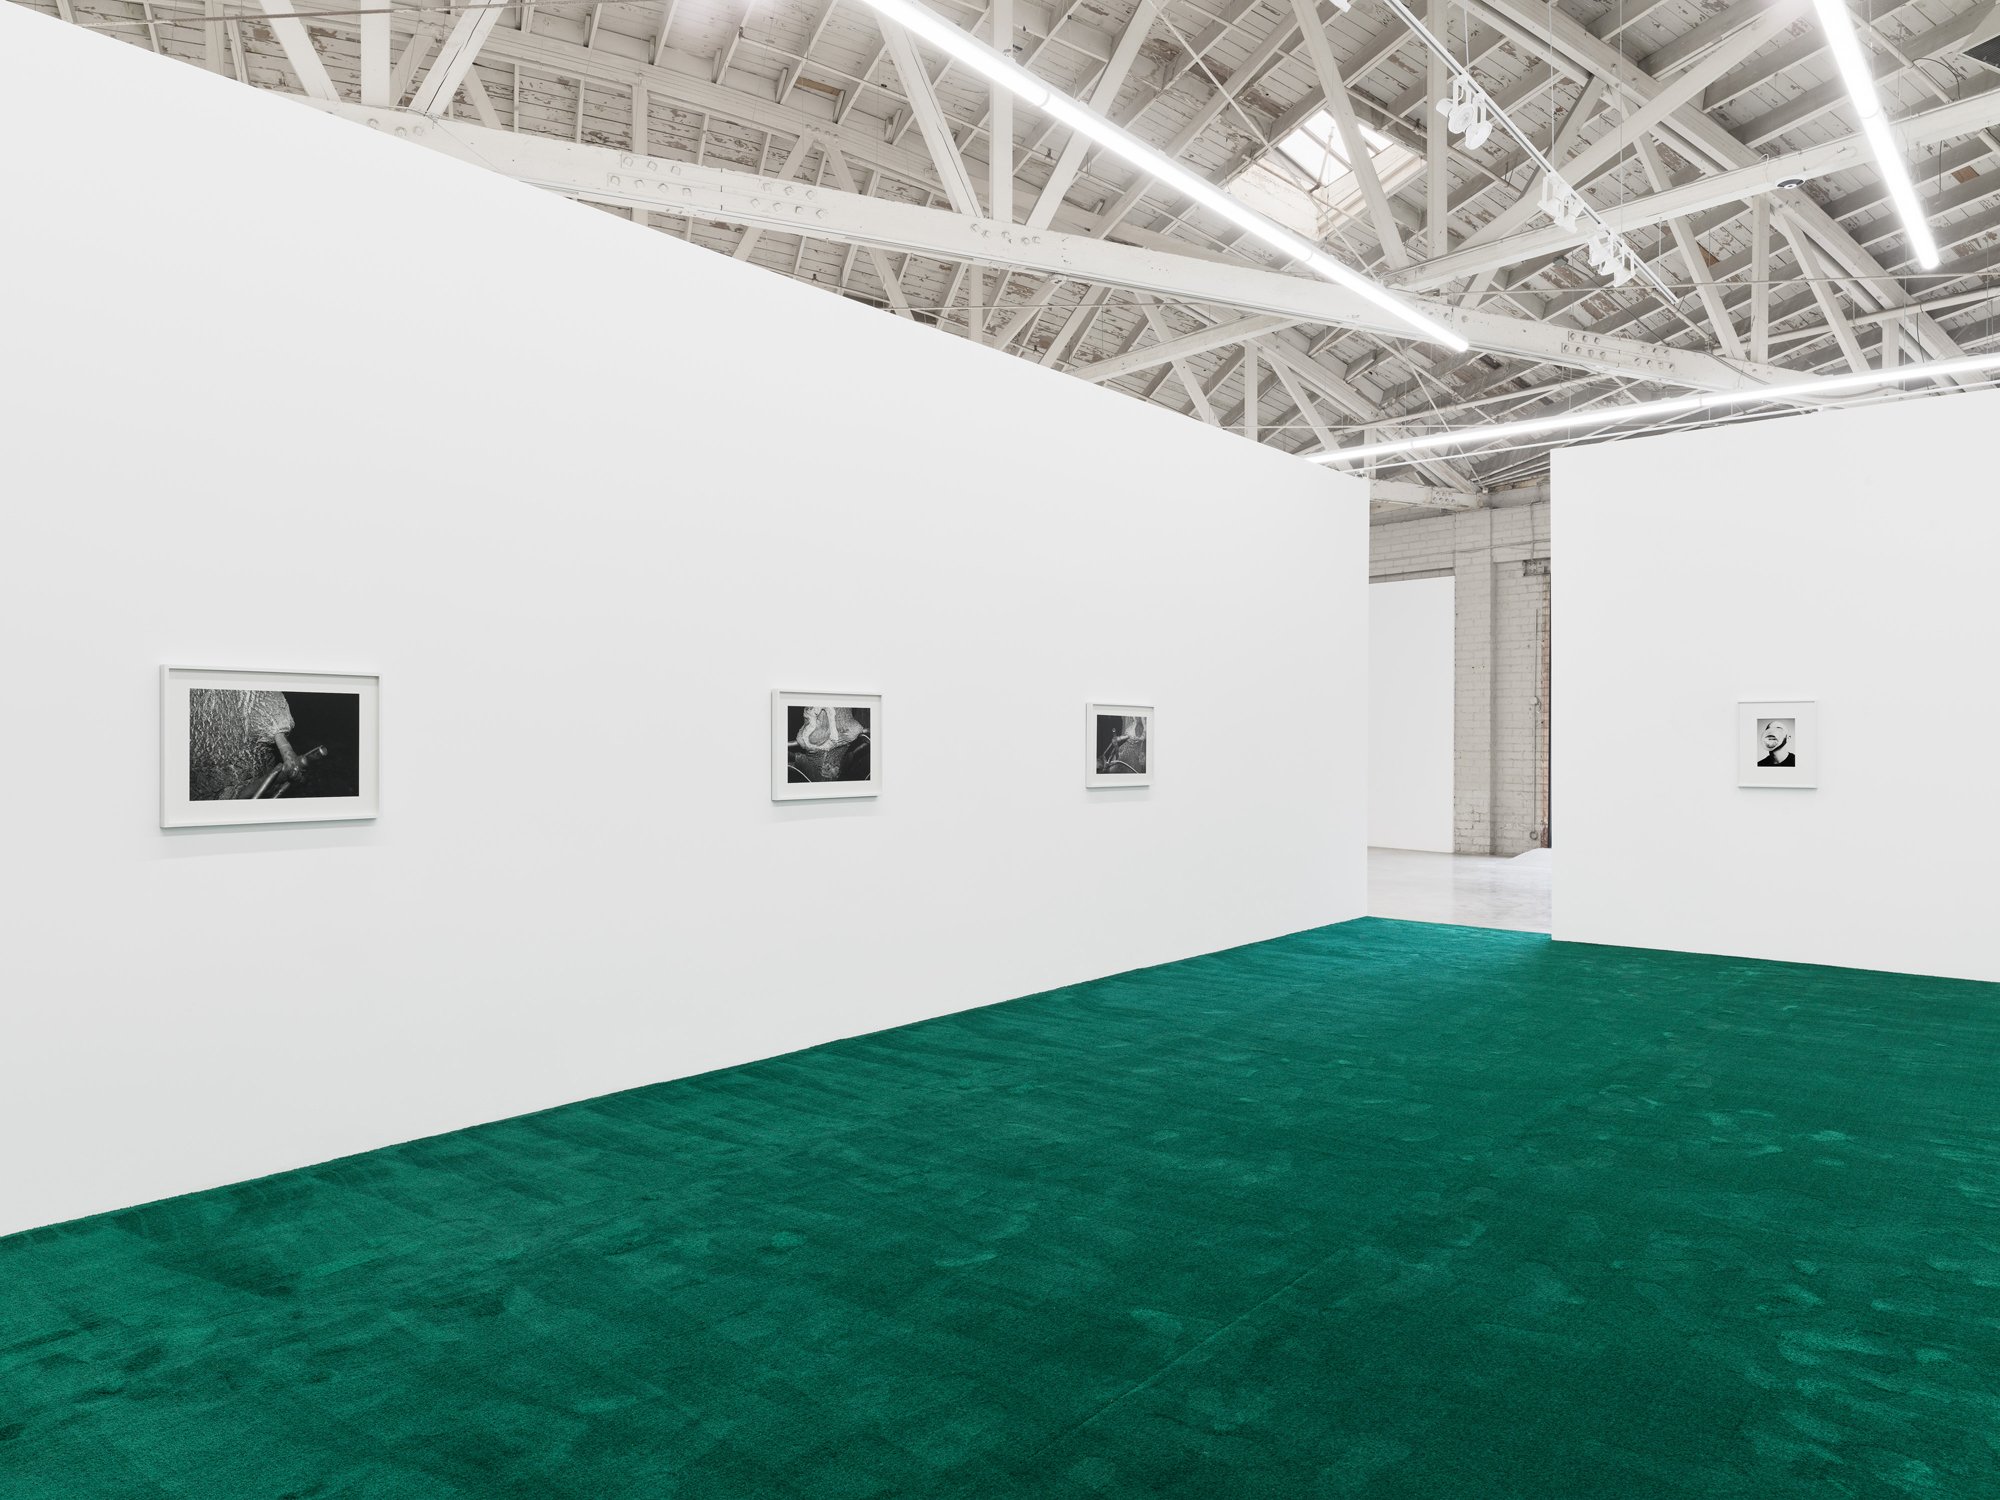   August 17, 2021  (2022) gelatin silver prints 20” x 27”   Bloom &nbsp;(2019) gelatin silver print 13” x 9.5”  Installation view of  One Eye Open  at Night Gallery, Los Angeles, USA 